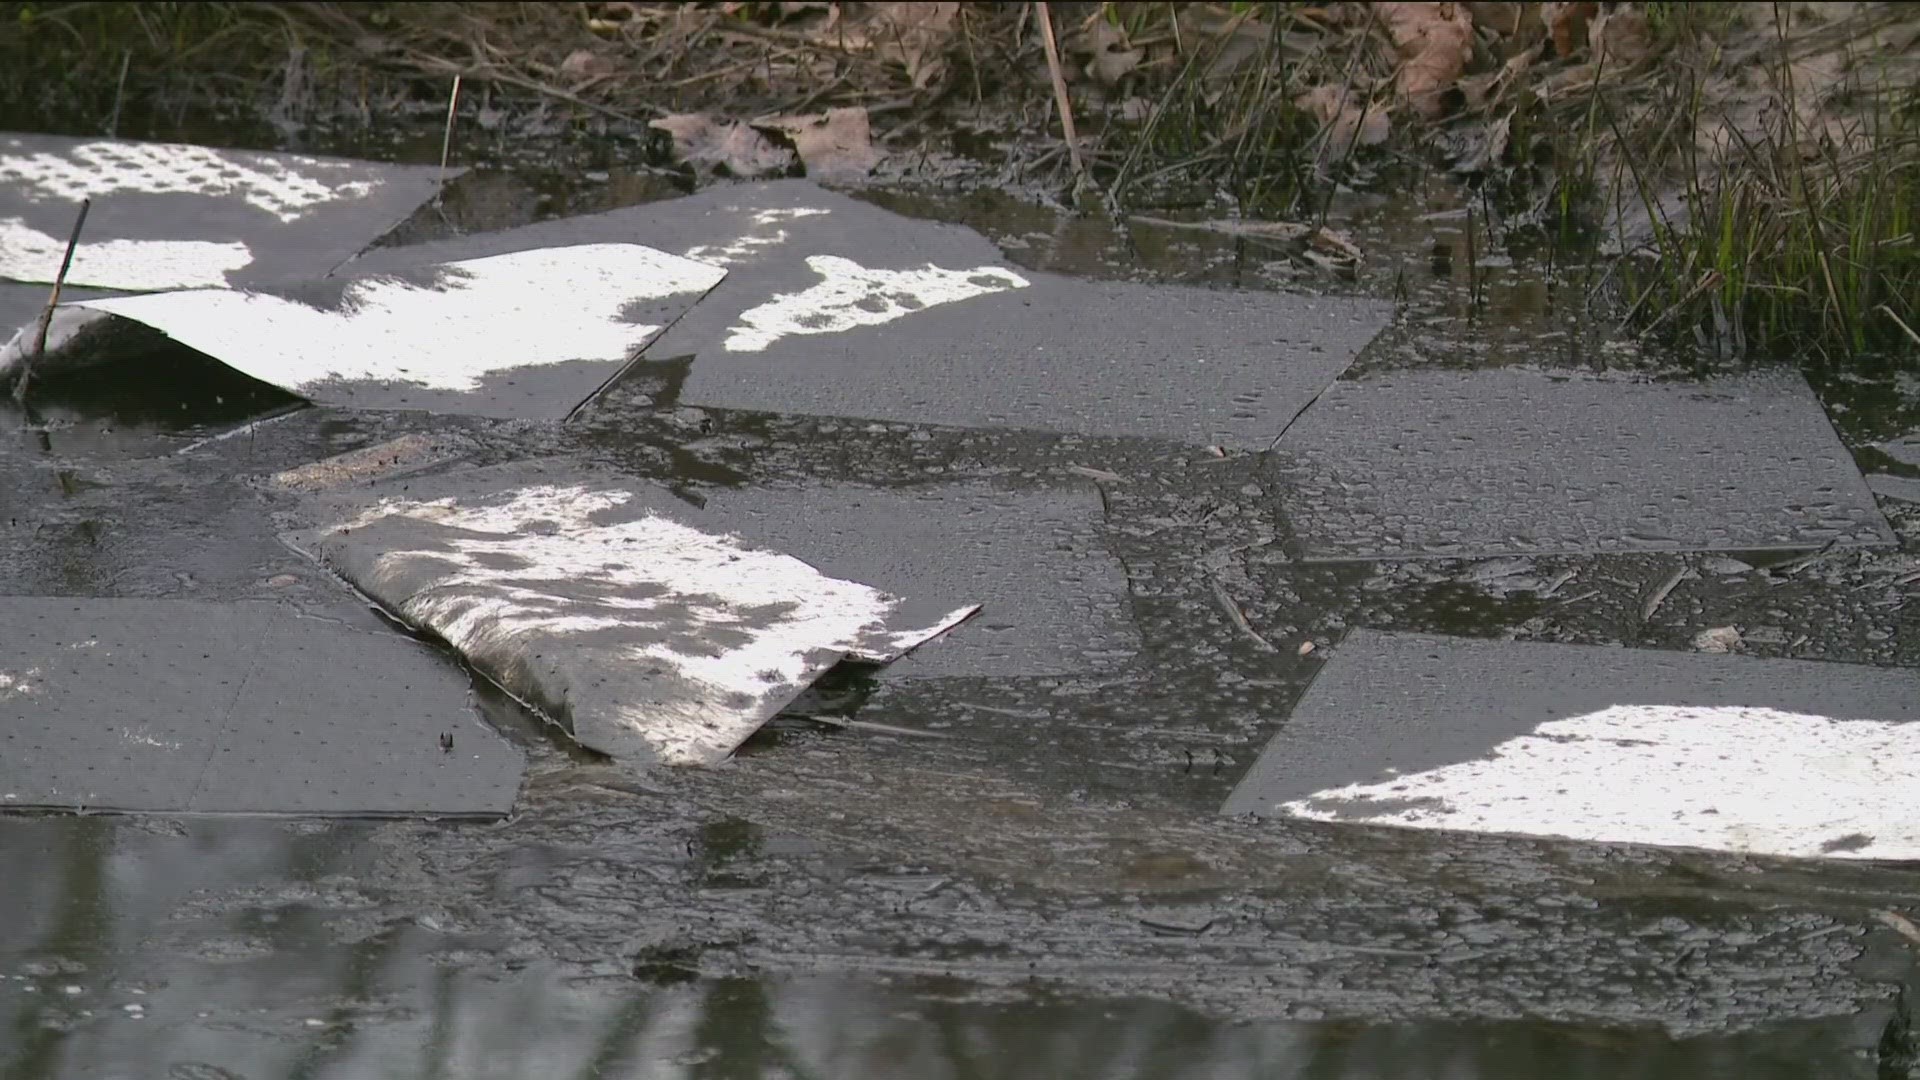 The Ohio EPA said it has not seen any wildlife impacts from the spill.